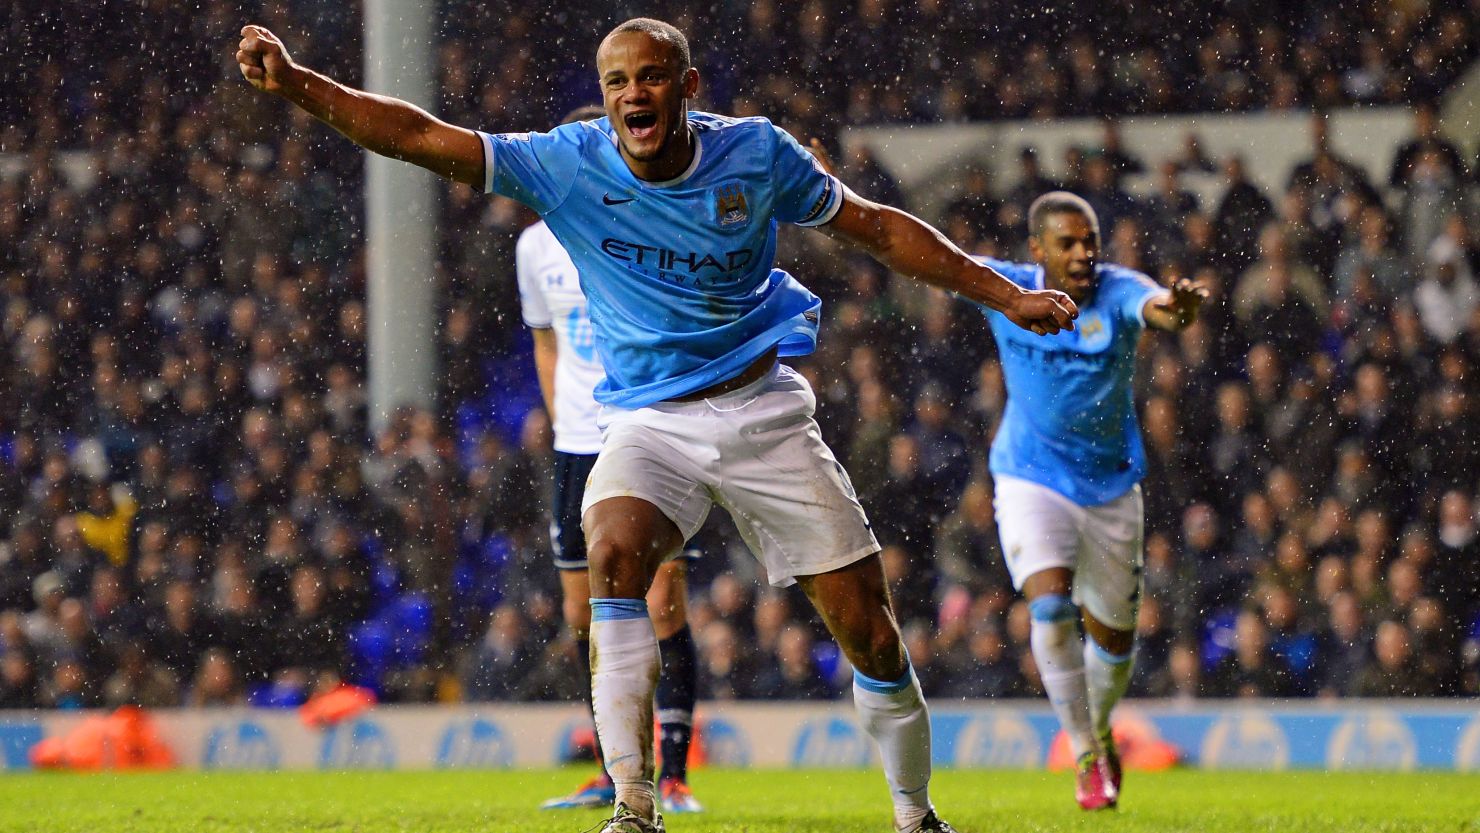 Vincent Kompany celebrates a goal and, more importantly, taking his team back to the top of the English Premier League.